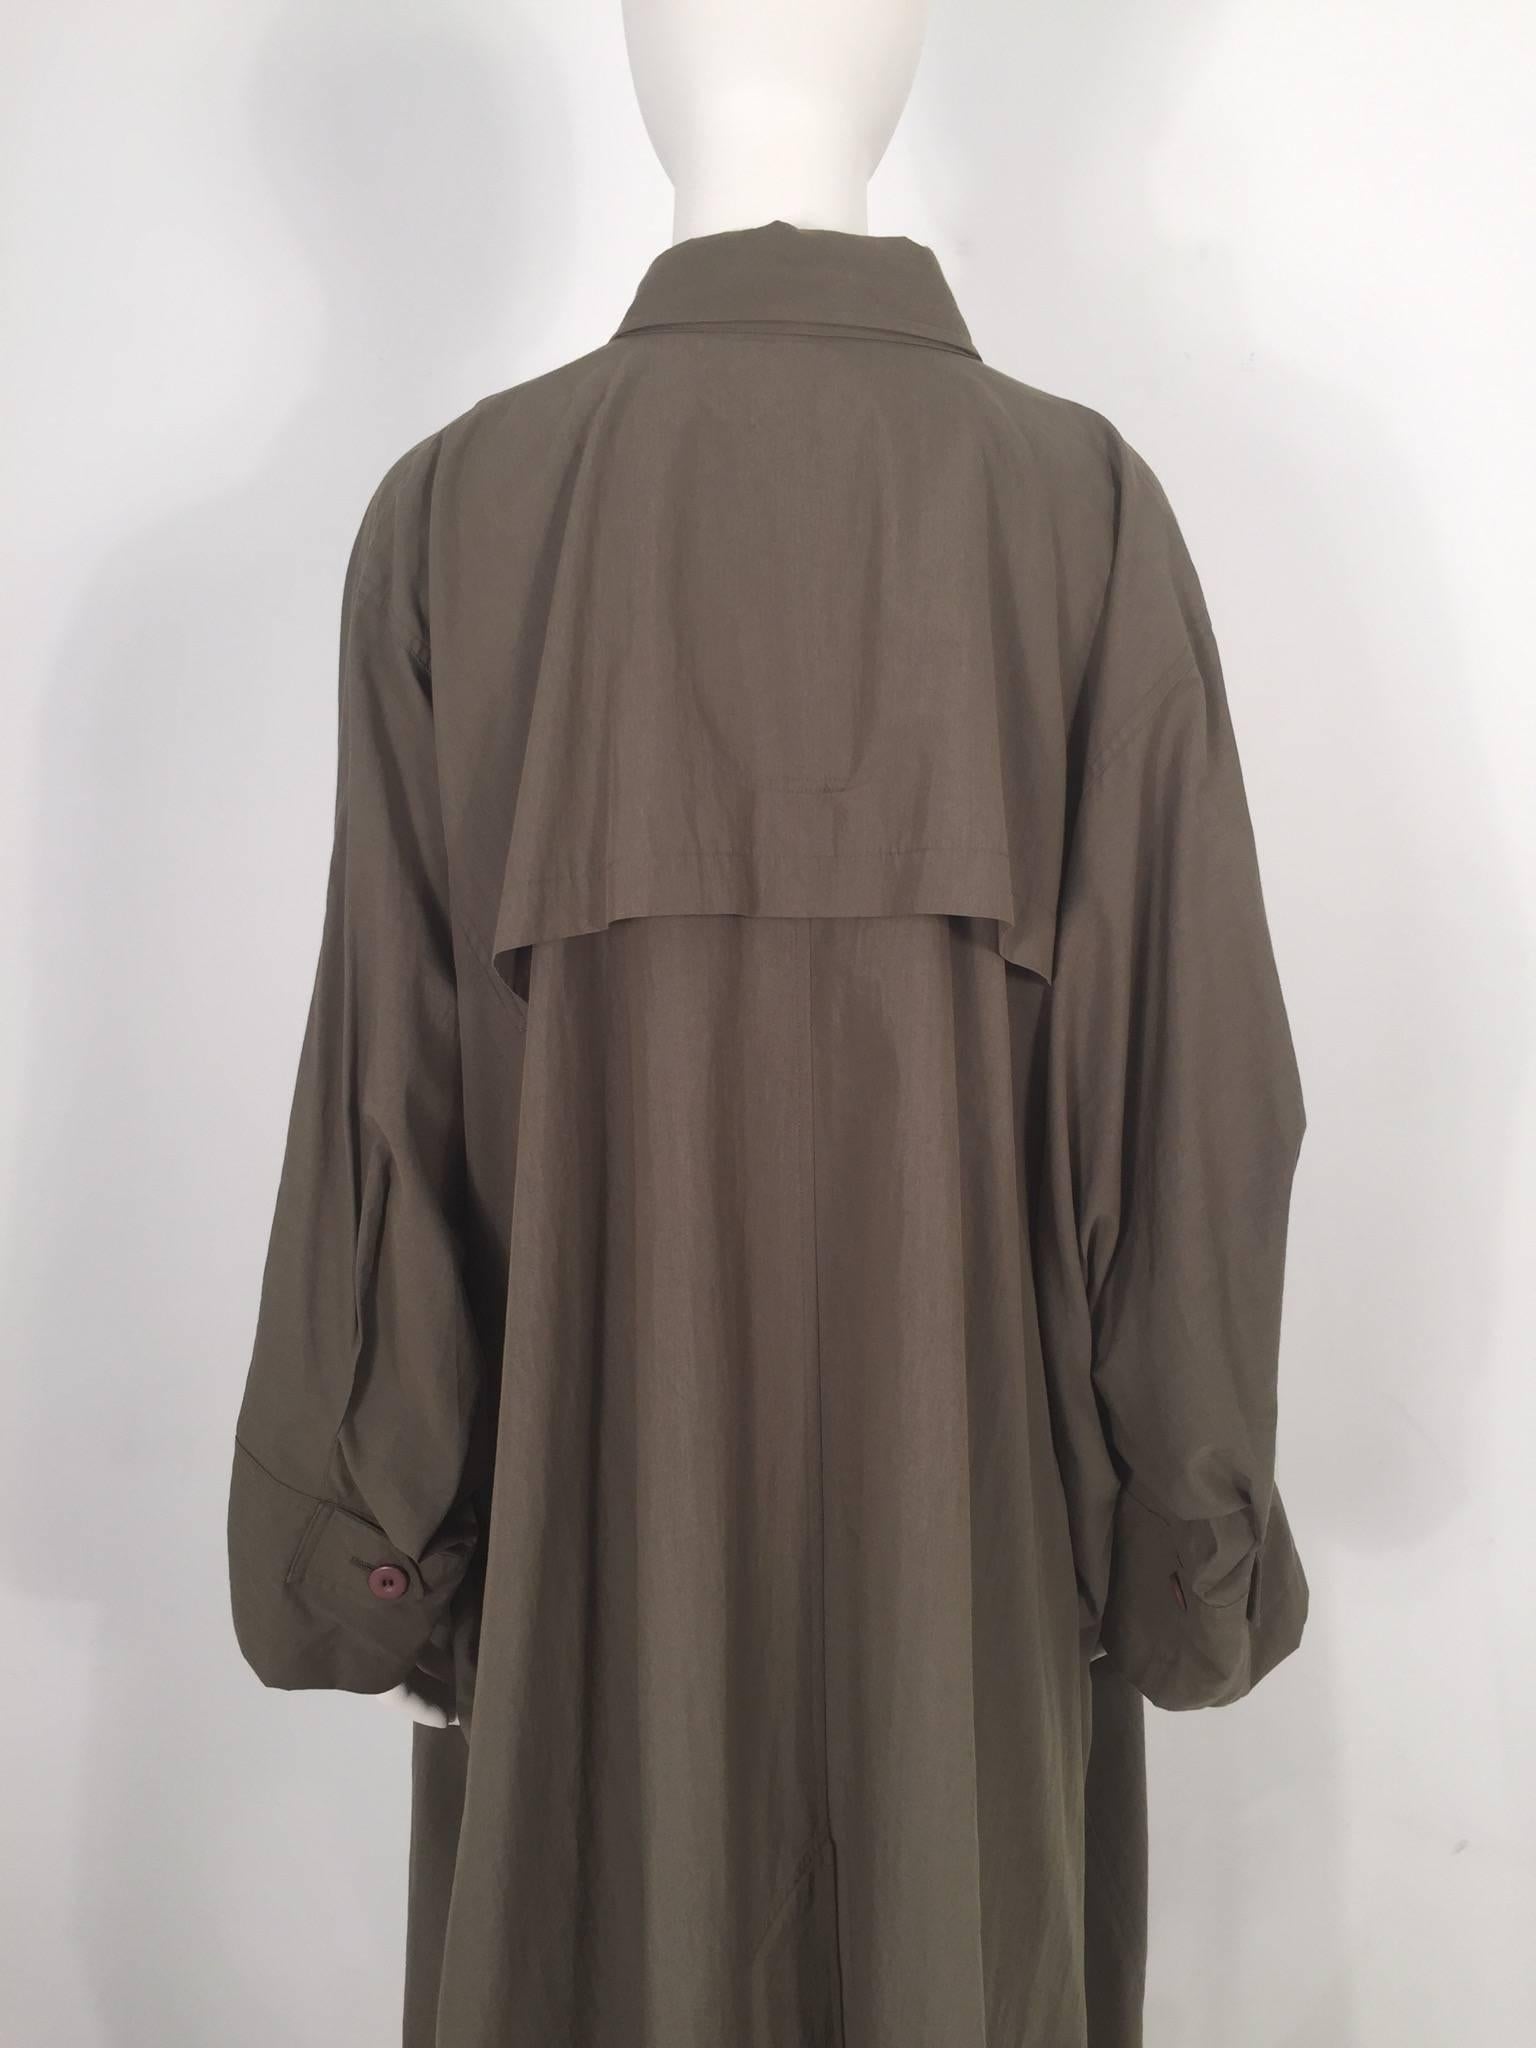 Issey Miyake Windcoat  In Excellent Condition In New York, NY